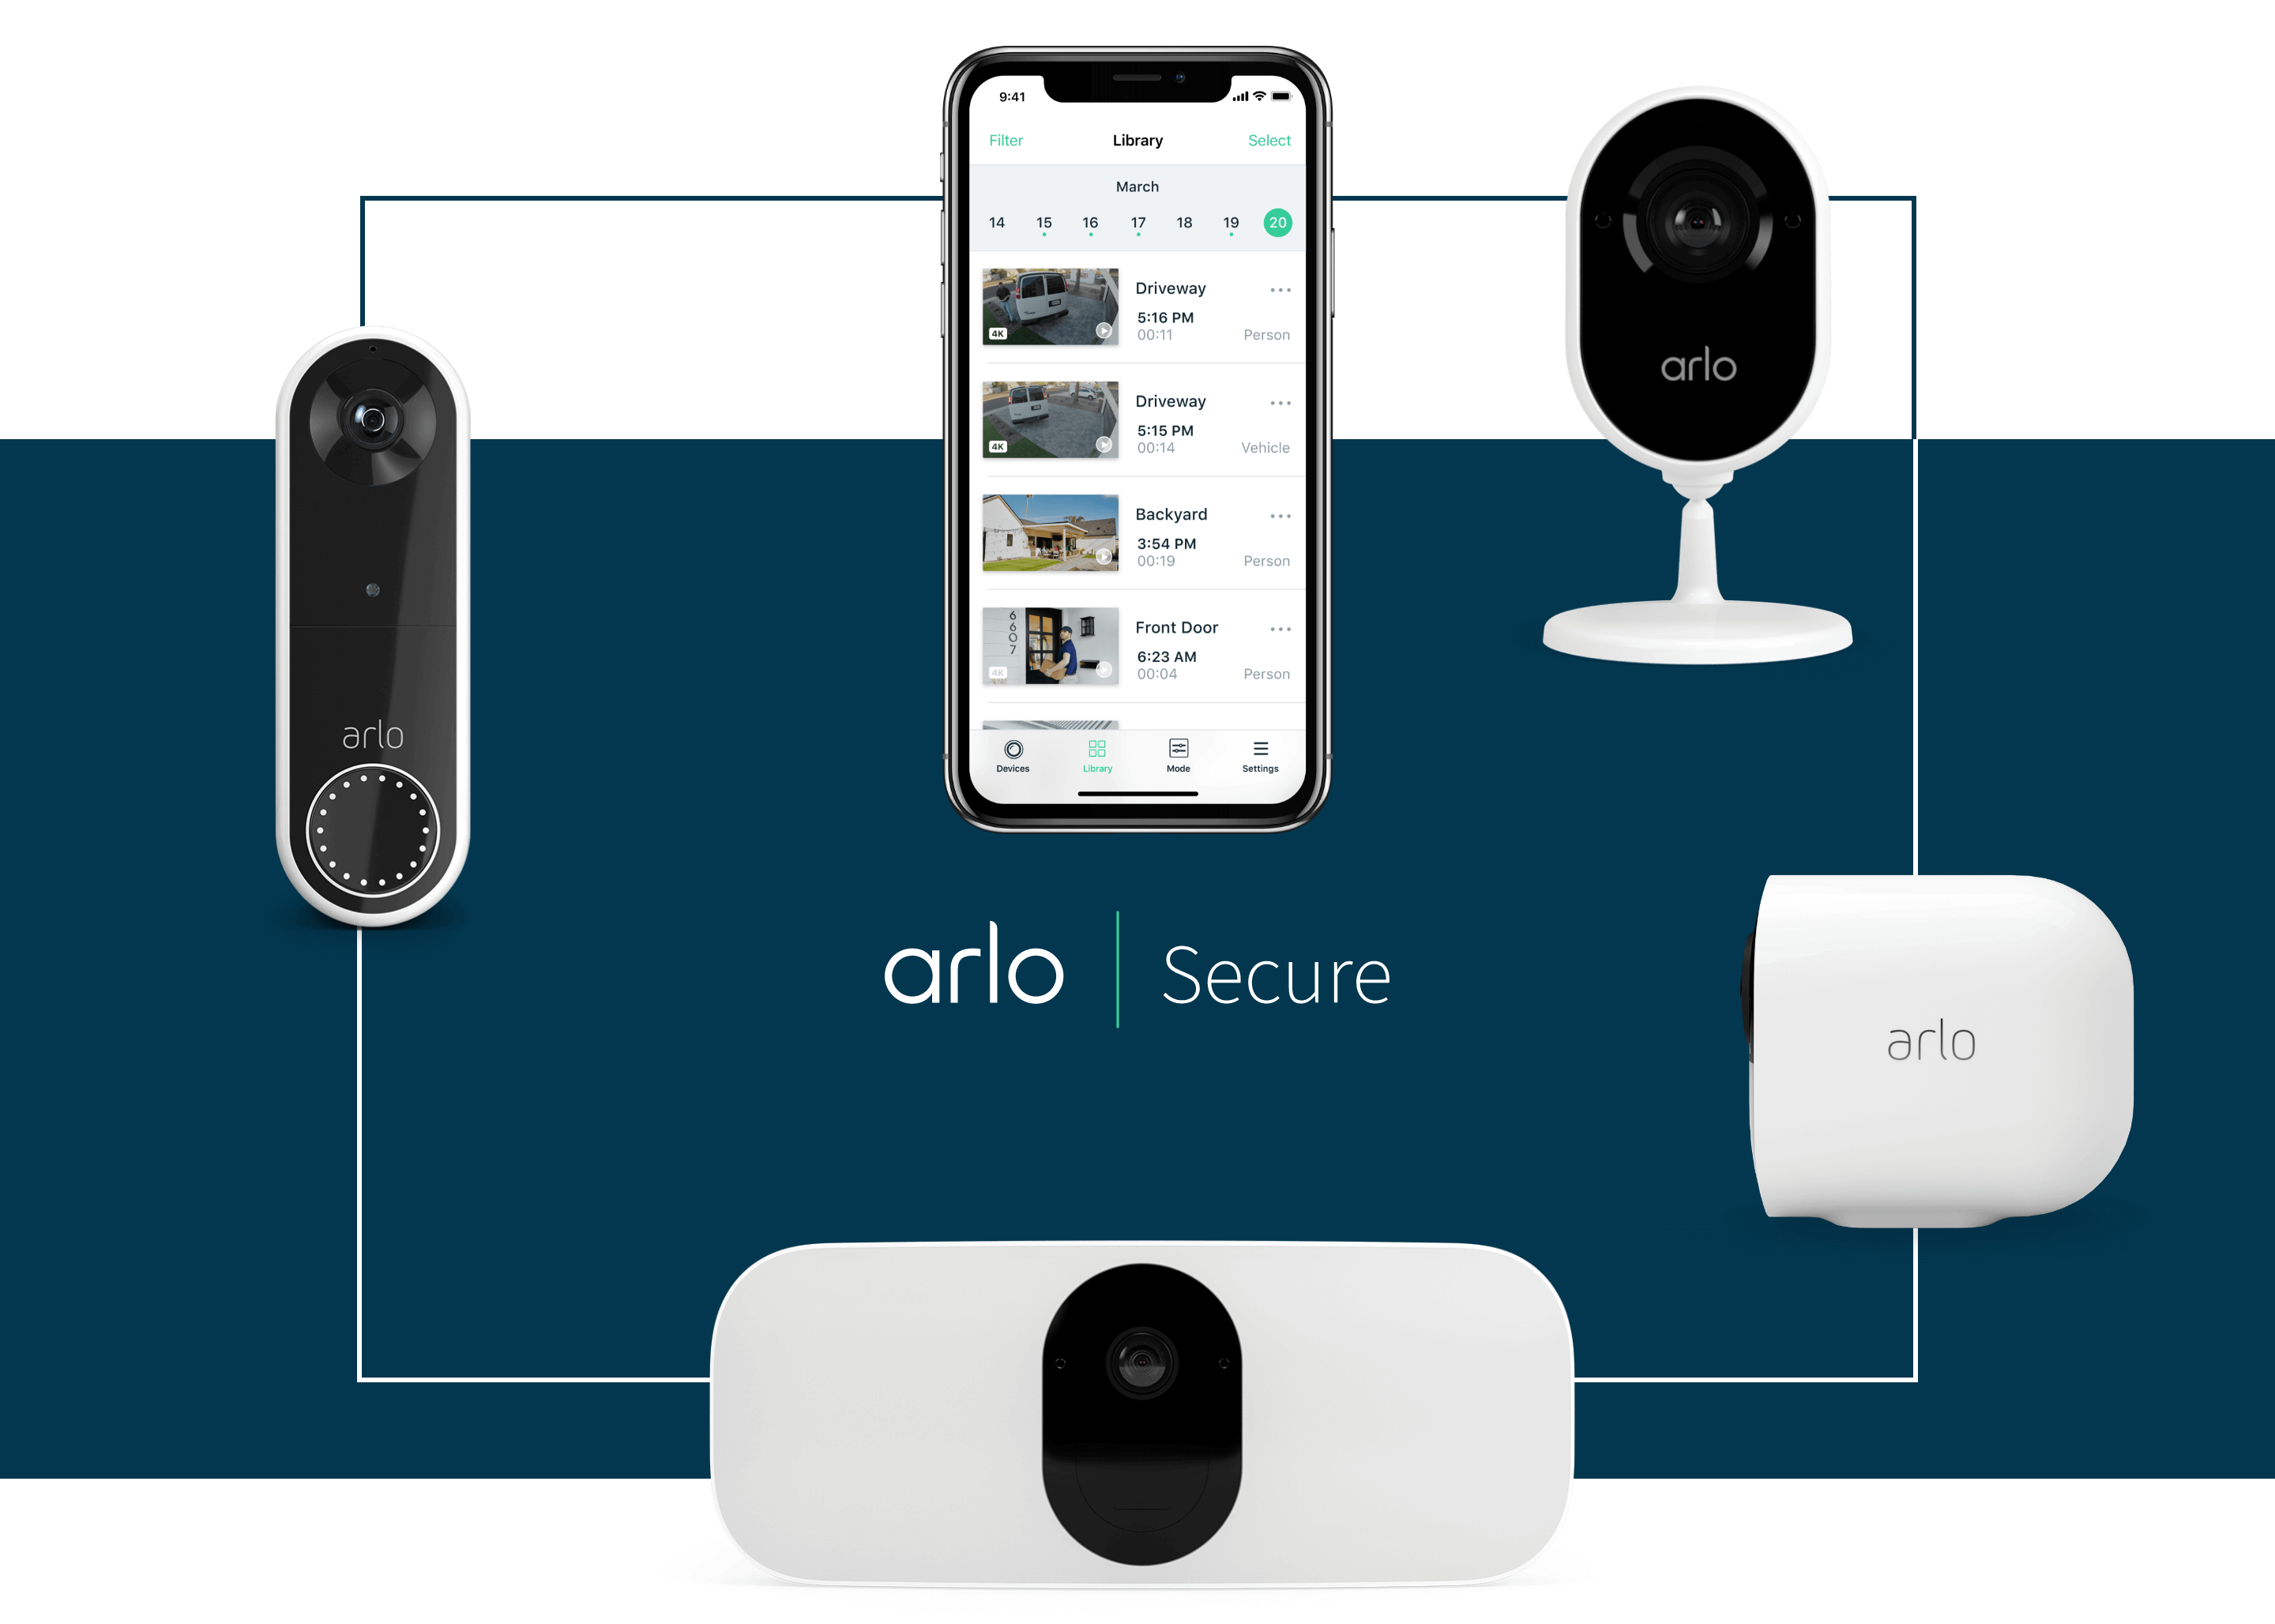 Arlo Service Plans give you A.I. powered home monitoring for less than the price of a coffee​